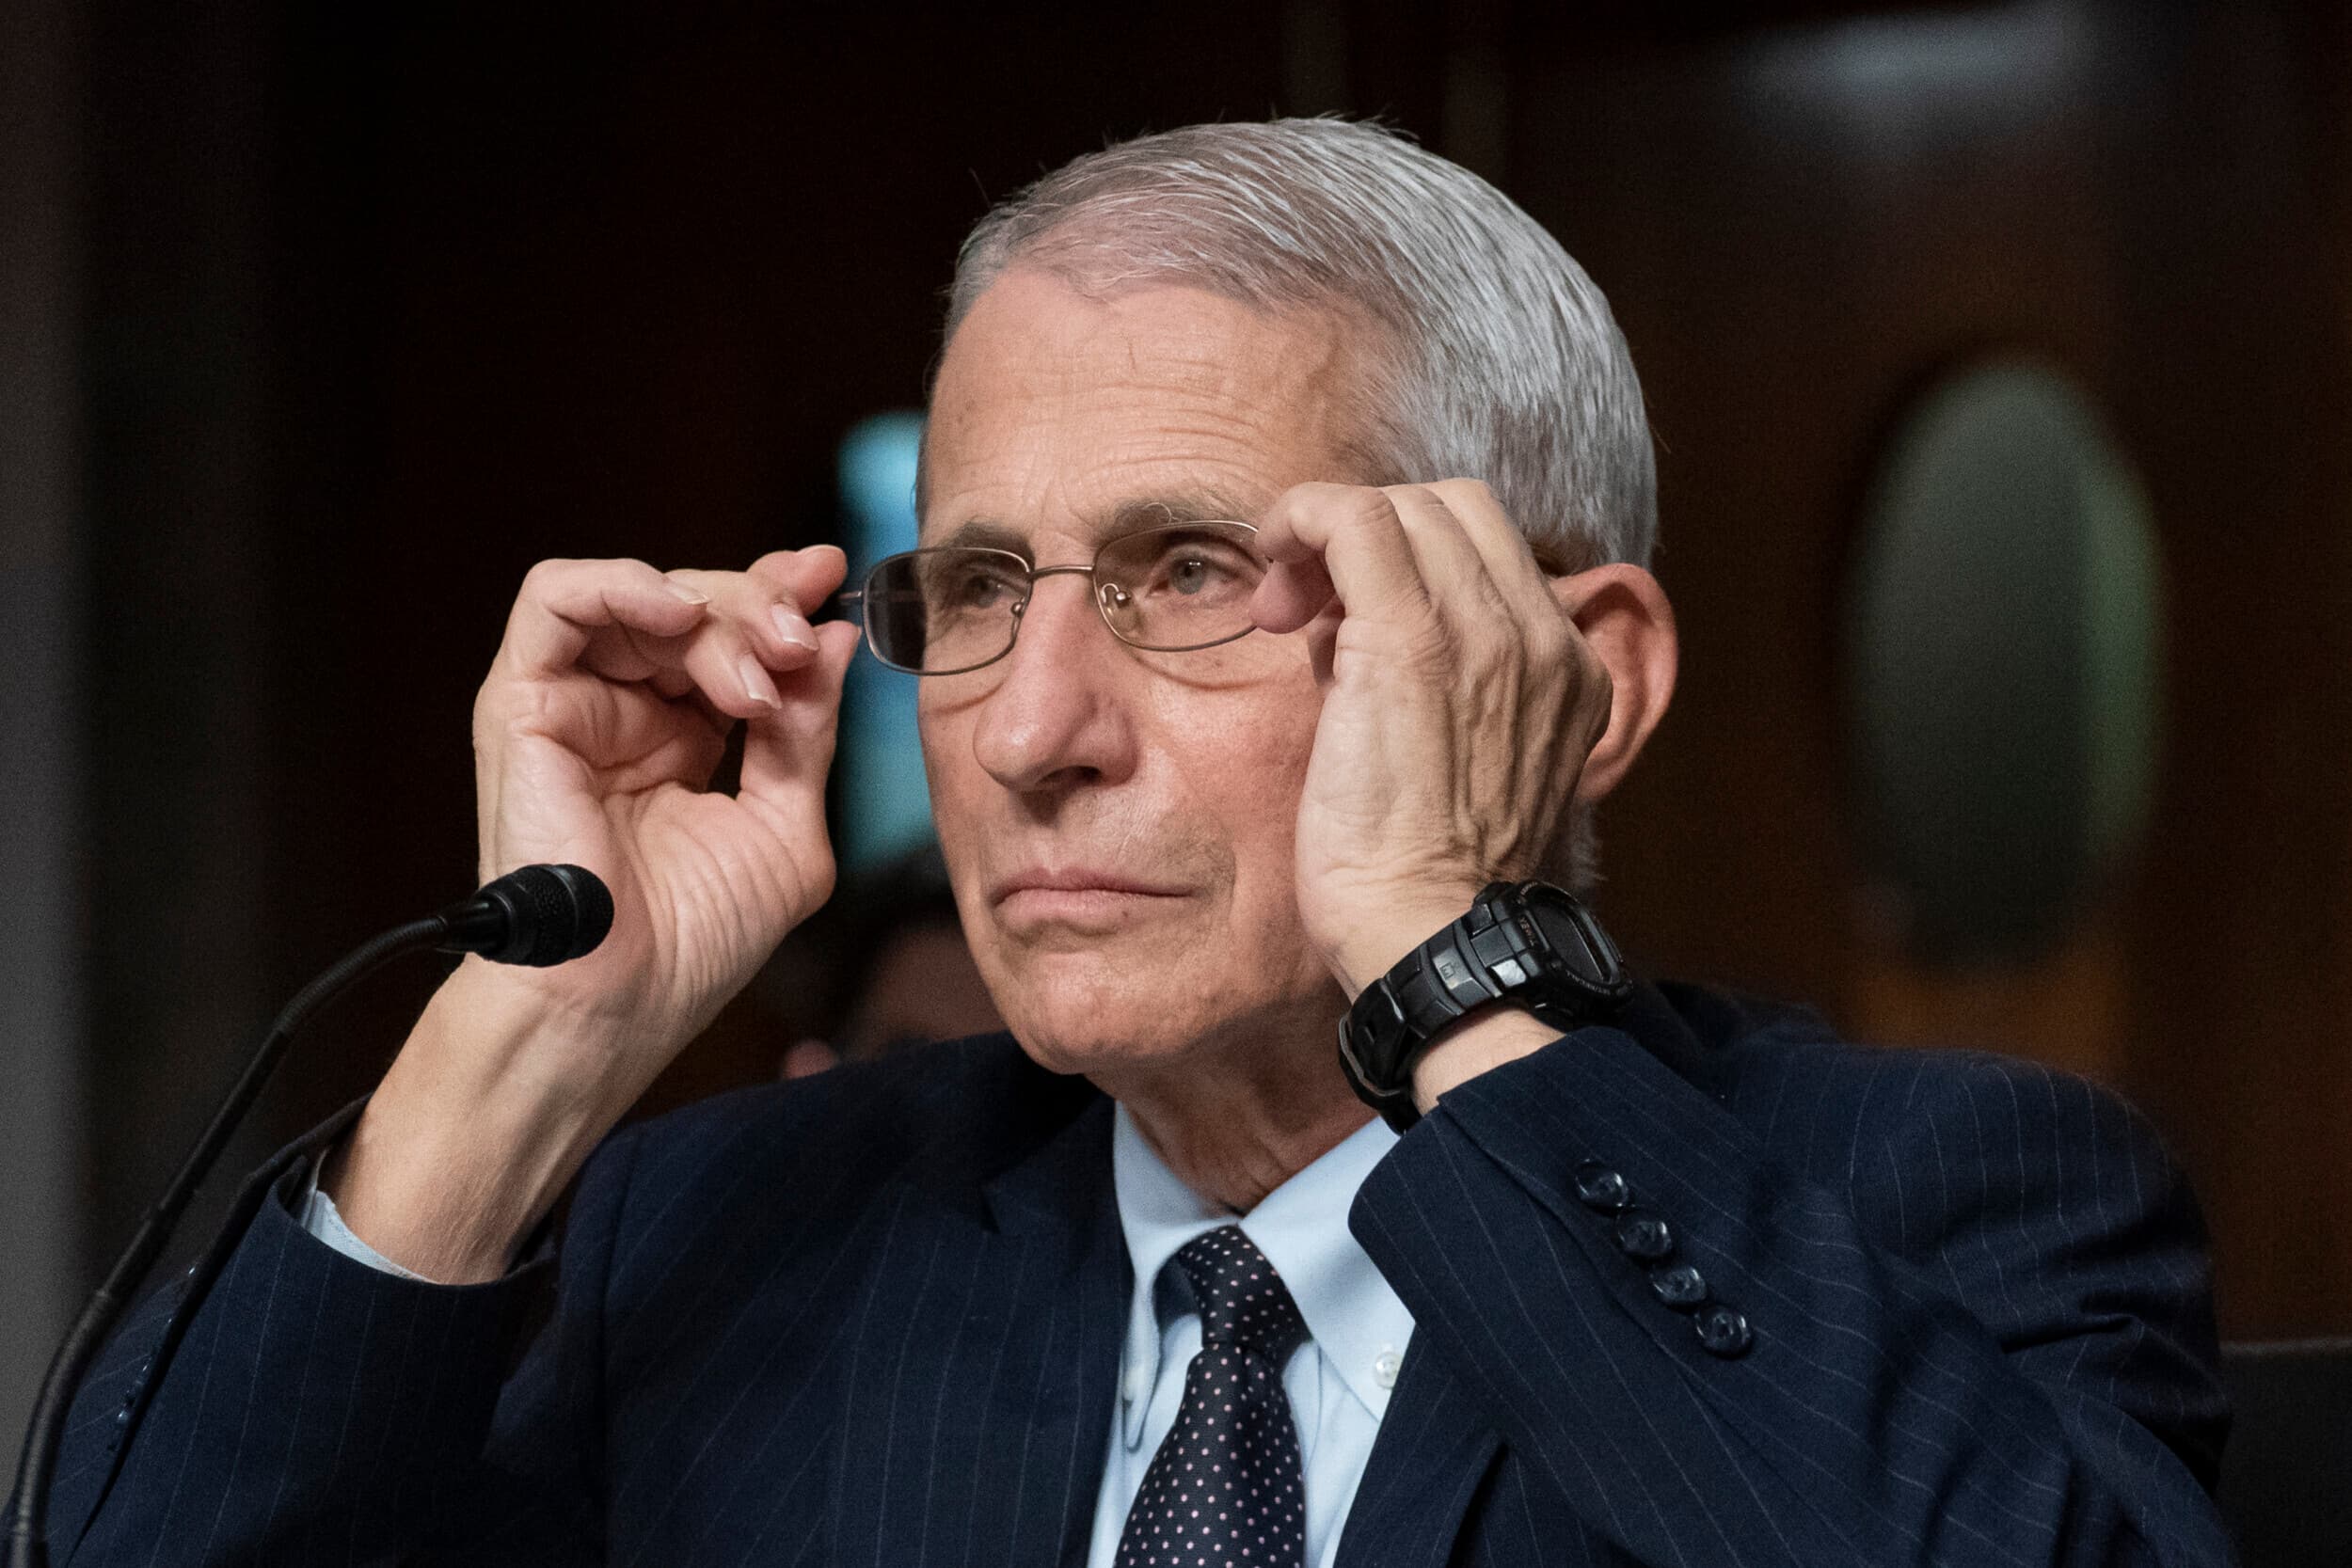 Dr. Anthony Fauci retirement